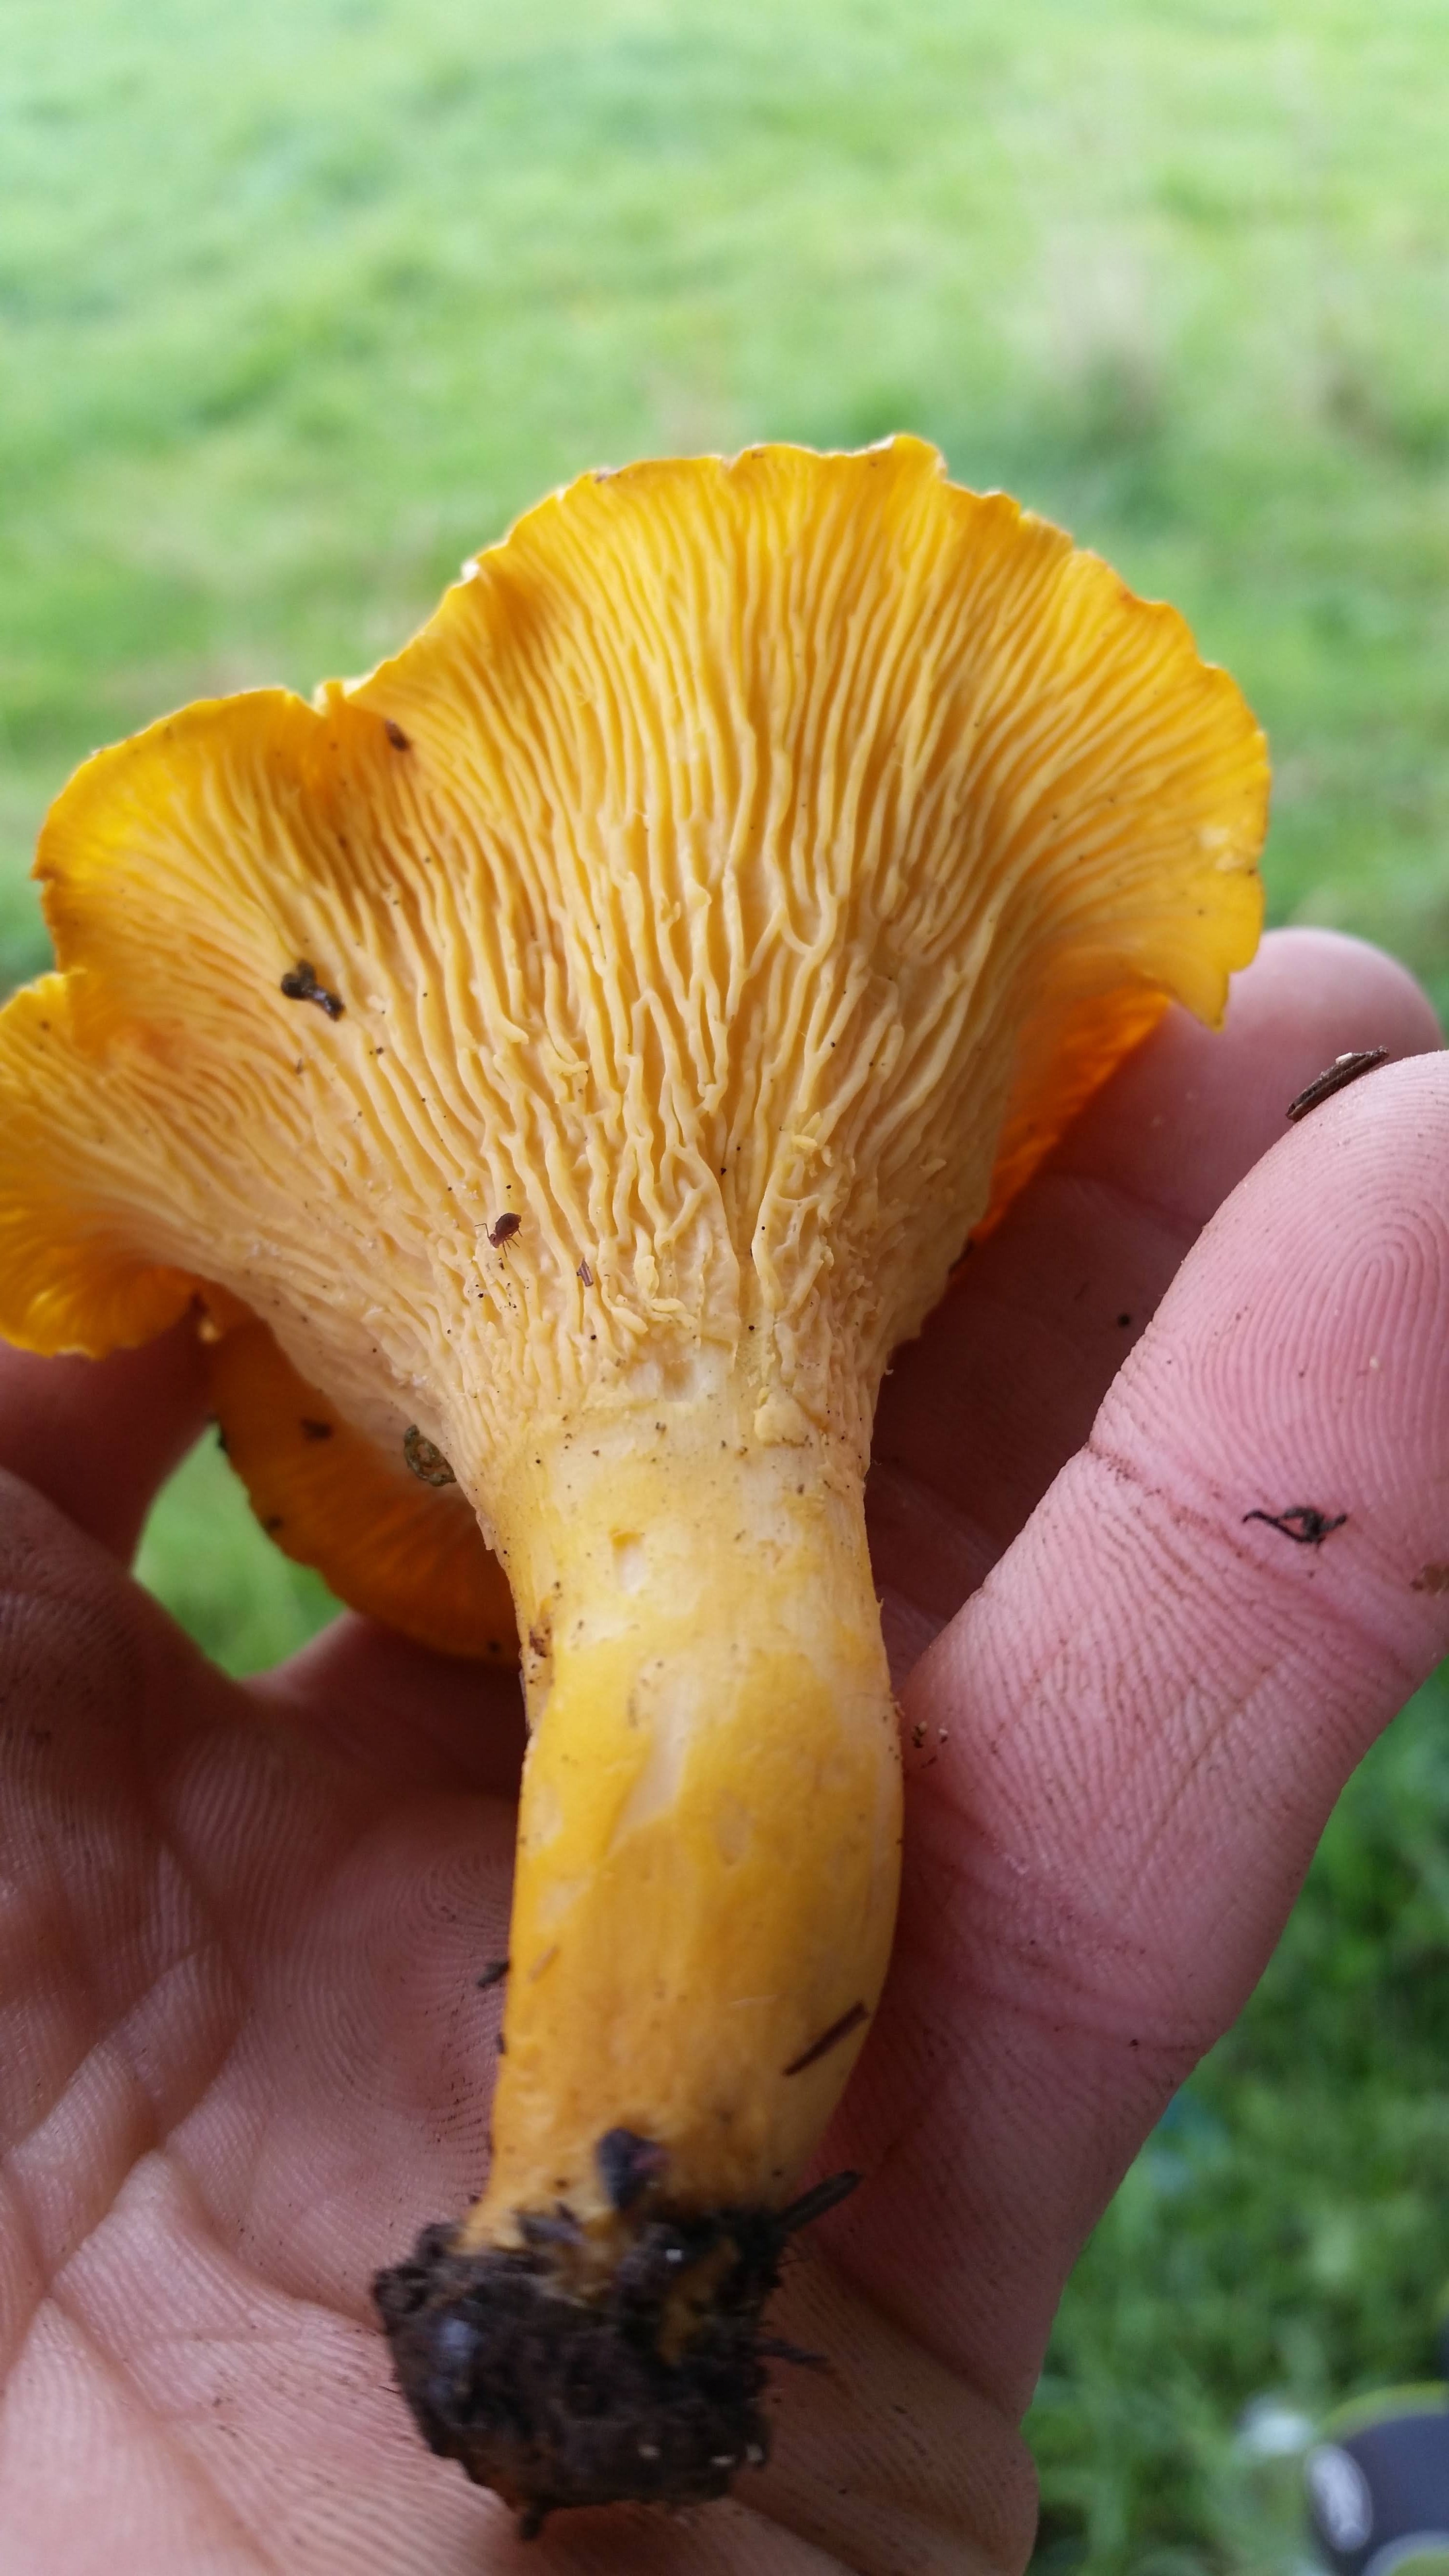 Introductory Mushroom Identification course with Viki Mather! -Friday September 29th 9:30am-3:30pm